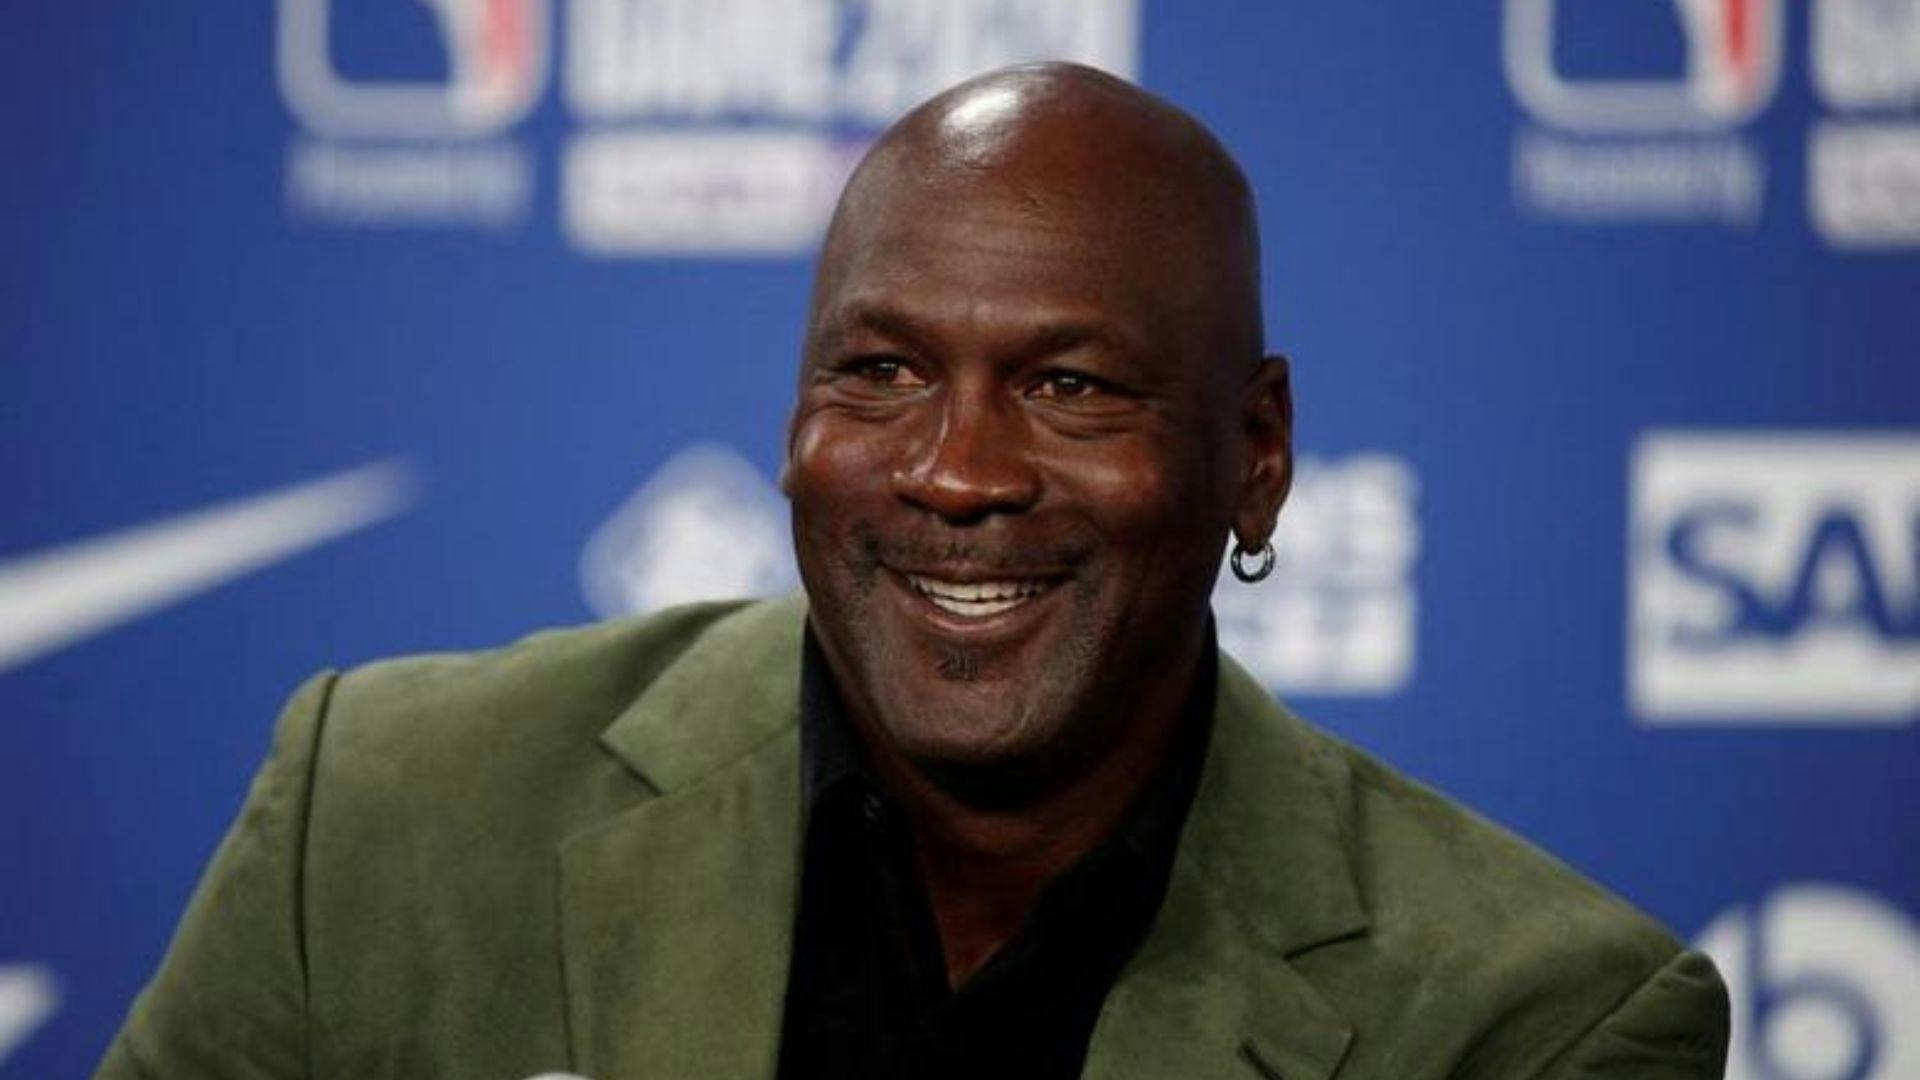 Michael Jordan’s decision to sell majority stake of Hornets brings hilarious reactions from public